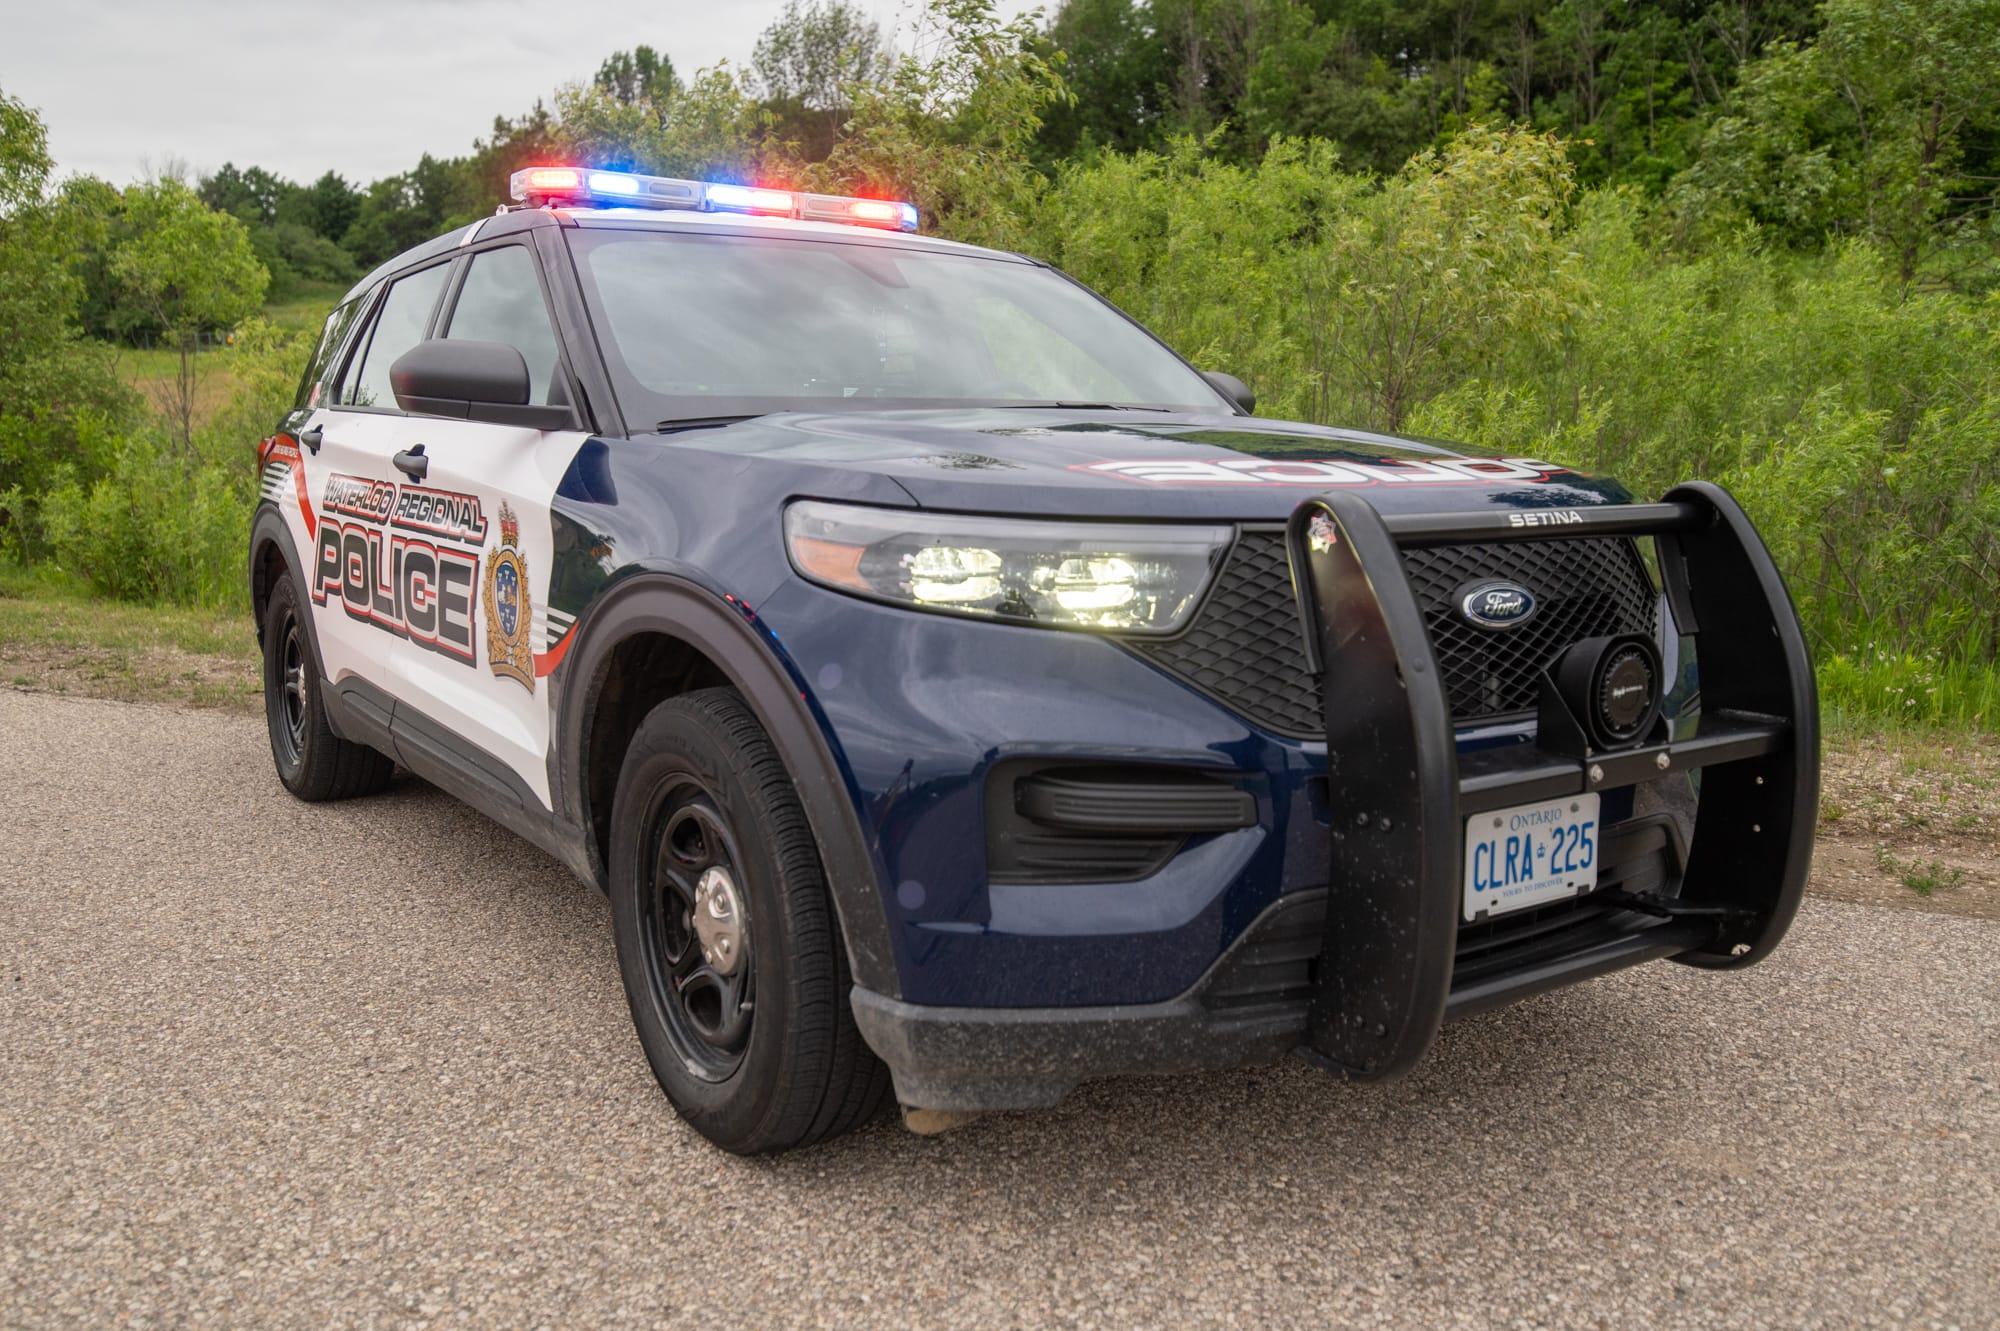 Provincial police issue more than 1,400 impaired driving charges during campaign